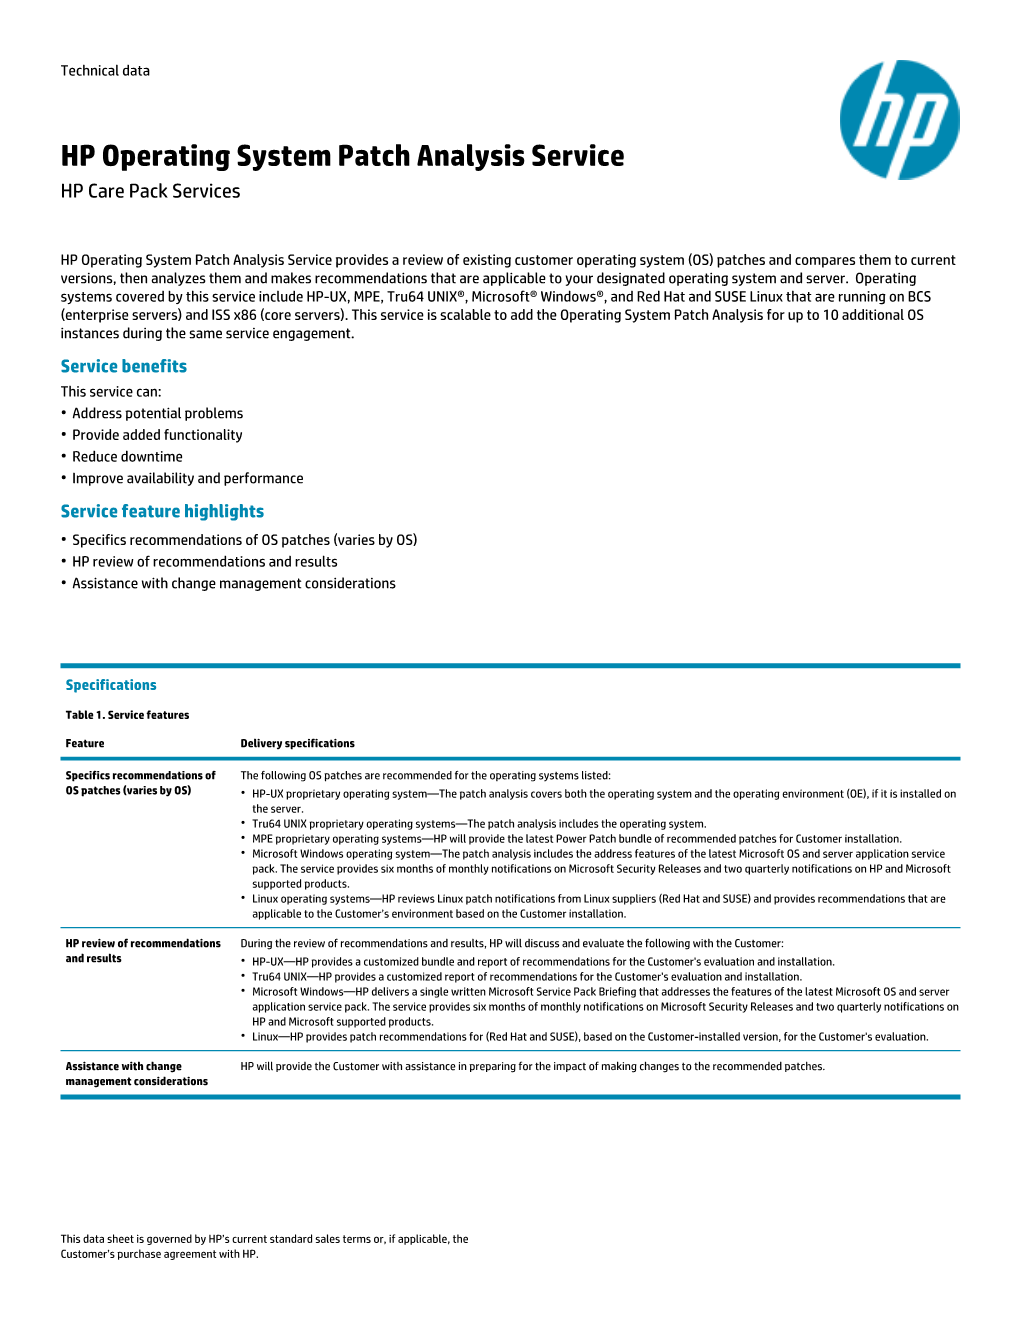 HP Operating System Patch Analysis Service Data Sheet